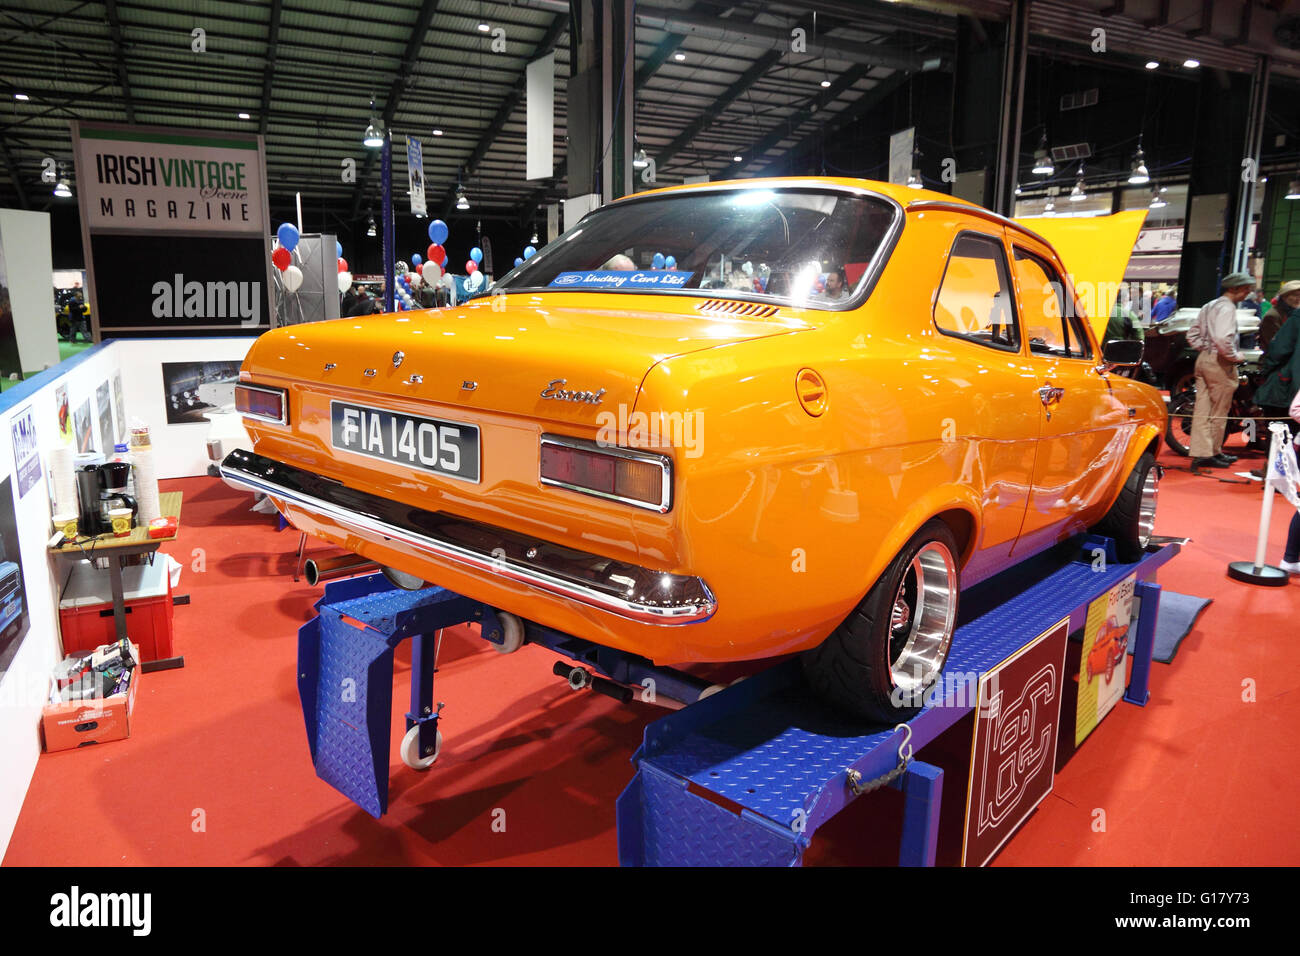 Restored Mk1 Ford Escort On Display Ramps At A Classic Car Show Stock Photo Alamy